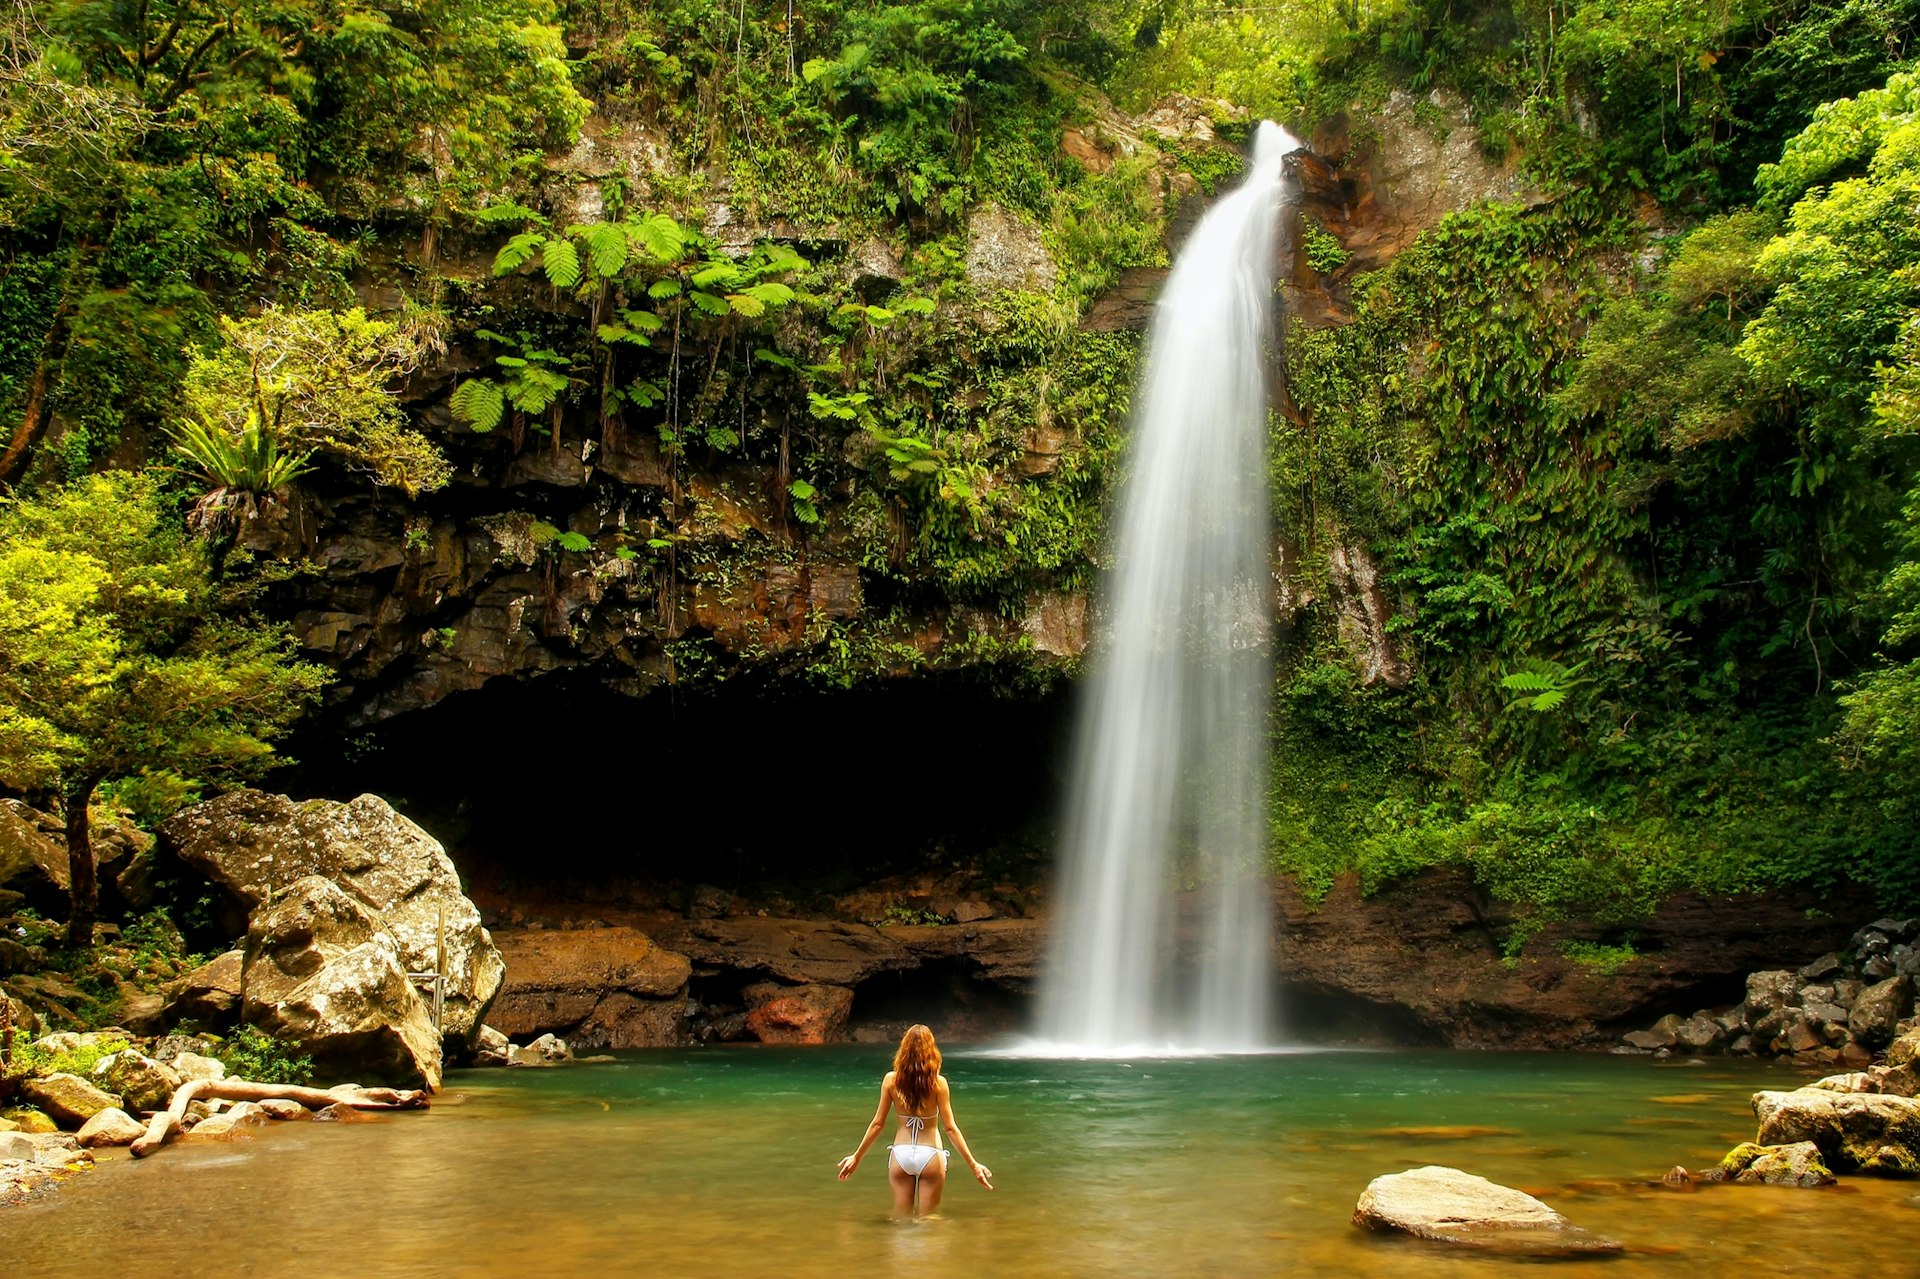 A woman stands in a pool of water in front of a waterfall